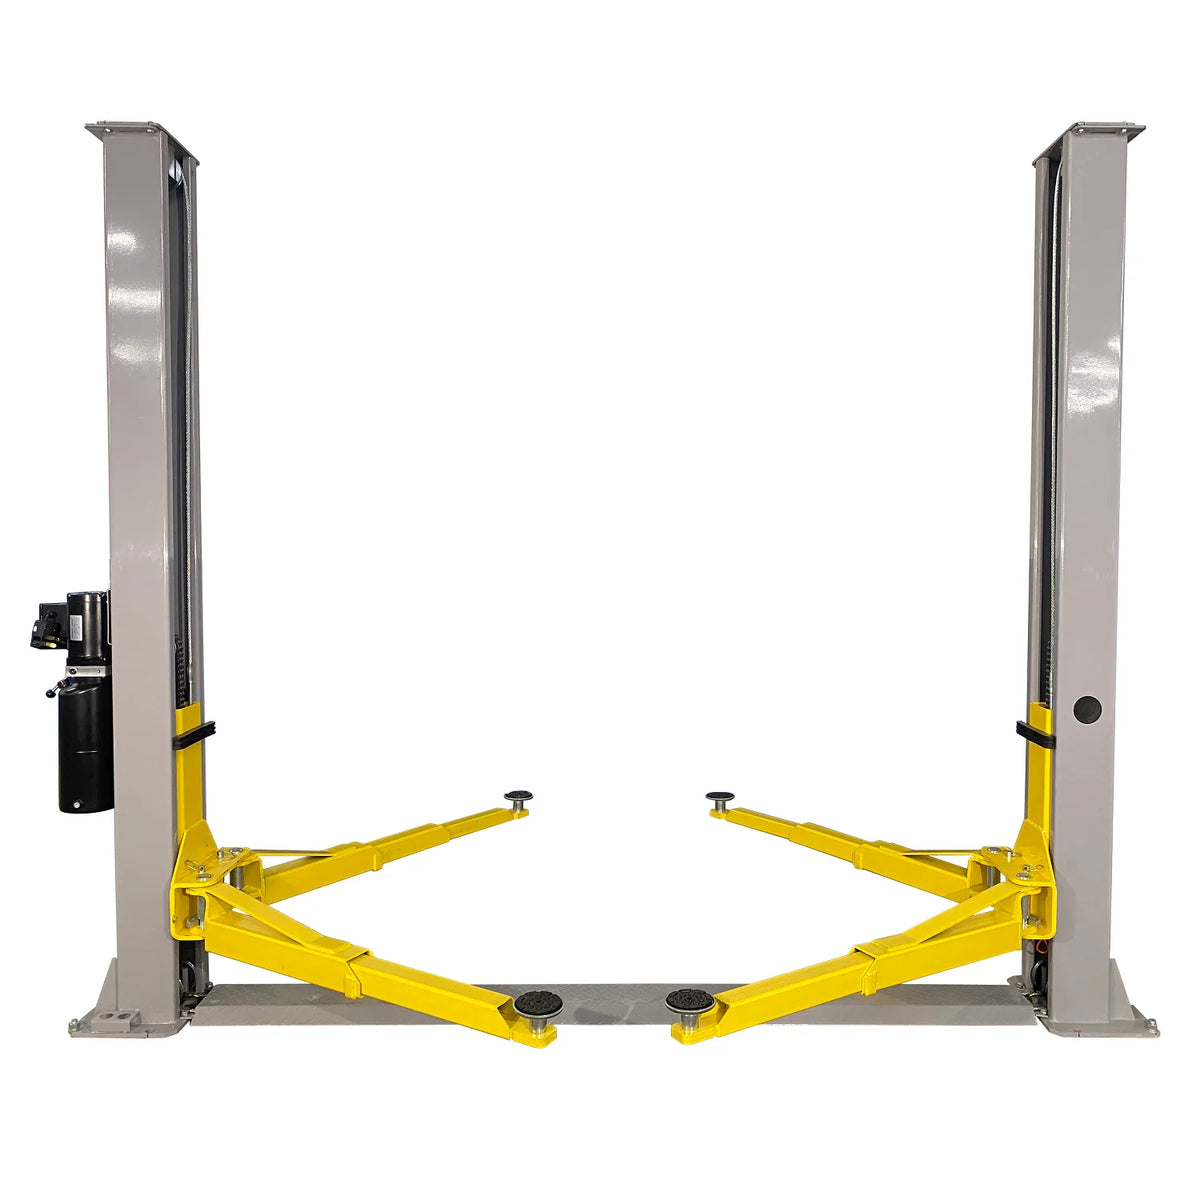 Triumph NT-9 Baseplate 2 Post Auto Lift, 3-Stage Arms, 9000-Lb Capacity